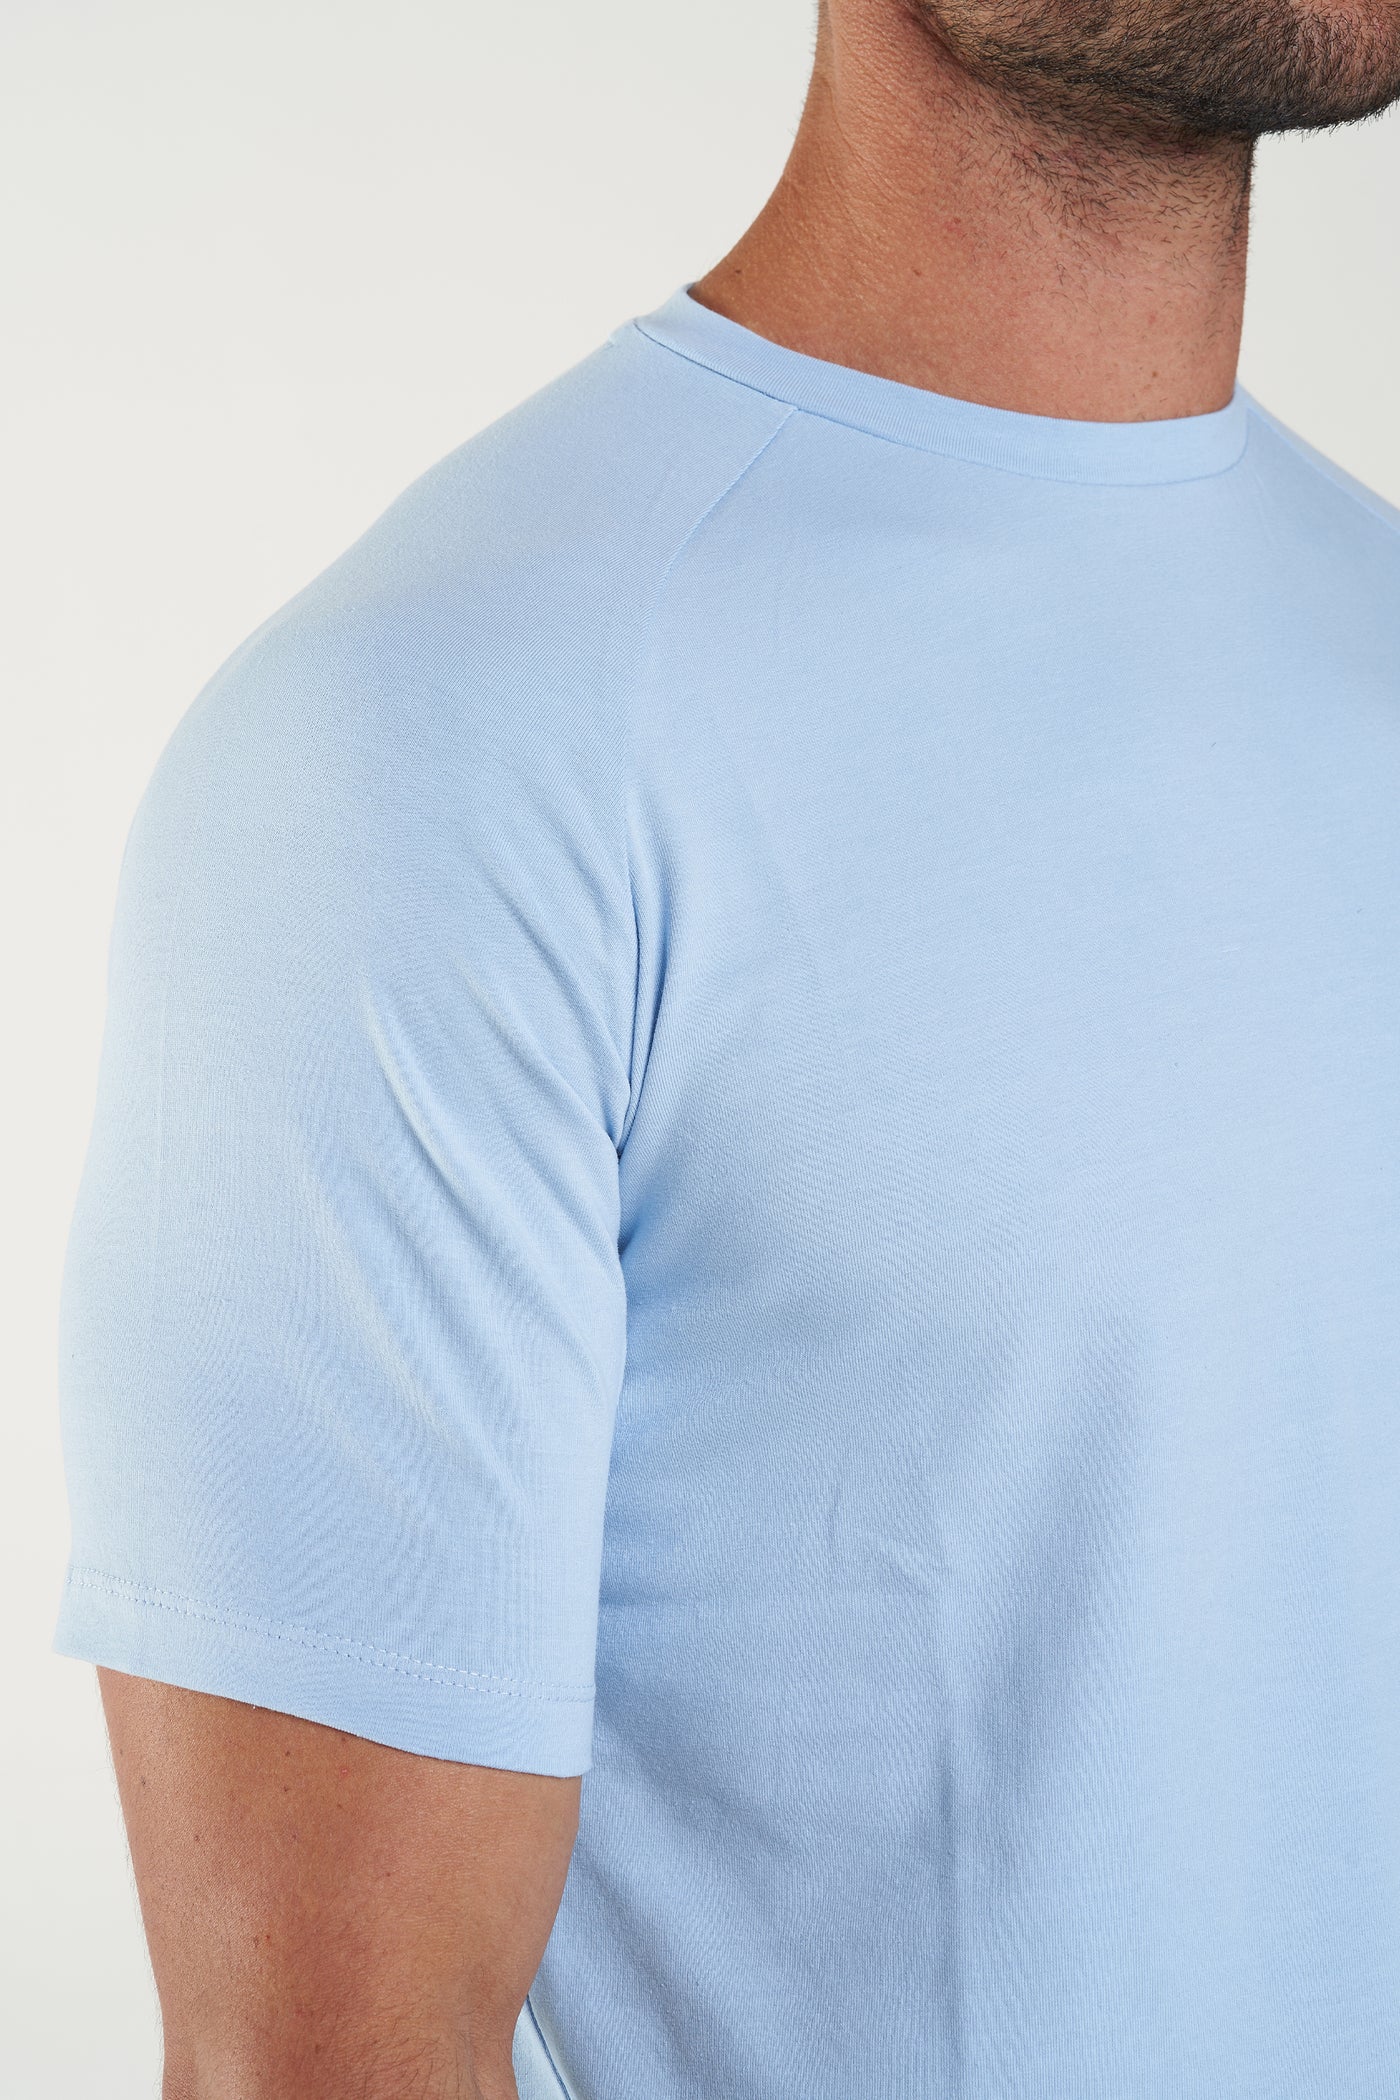 THE MUSCLE BASIC T-SHIRT - LIGHT BLUE - ICON. AMSTERDAM